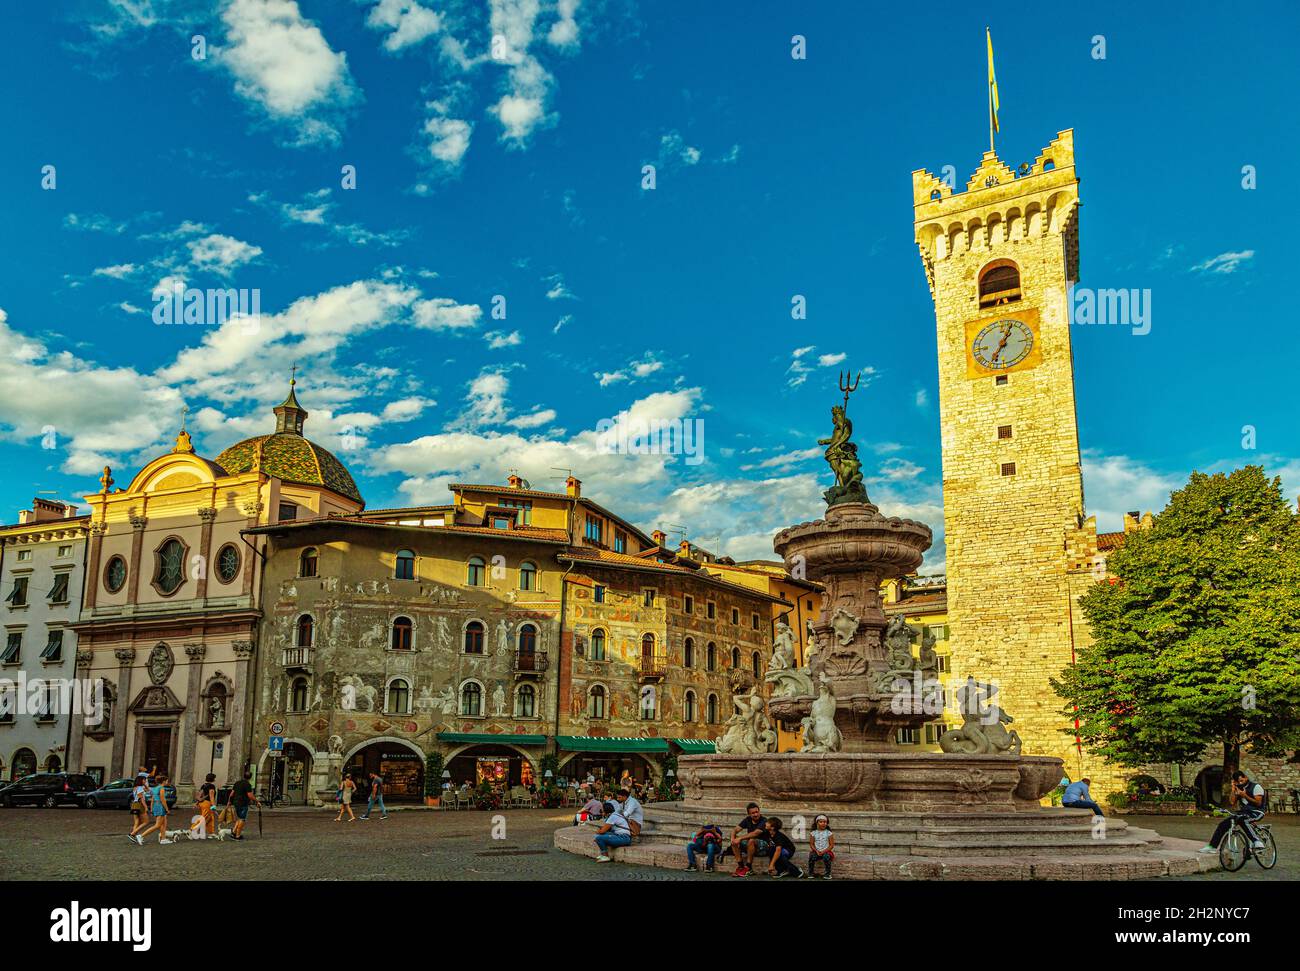 Piazza Duomo in Trento, with frescoed houses, a civic tower with a clock and a monumental fountain. Province of Trento, Trentino-Alto Adige, Italy Stock Photo